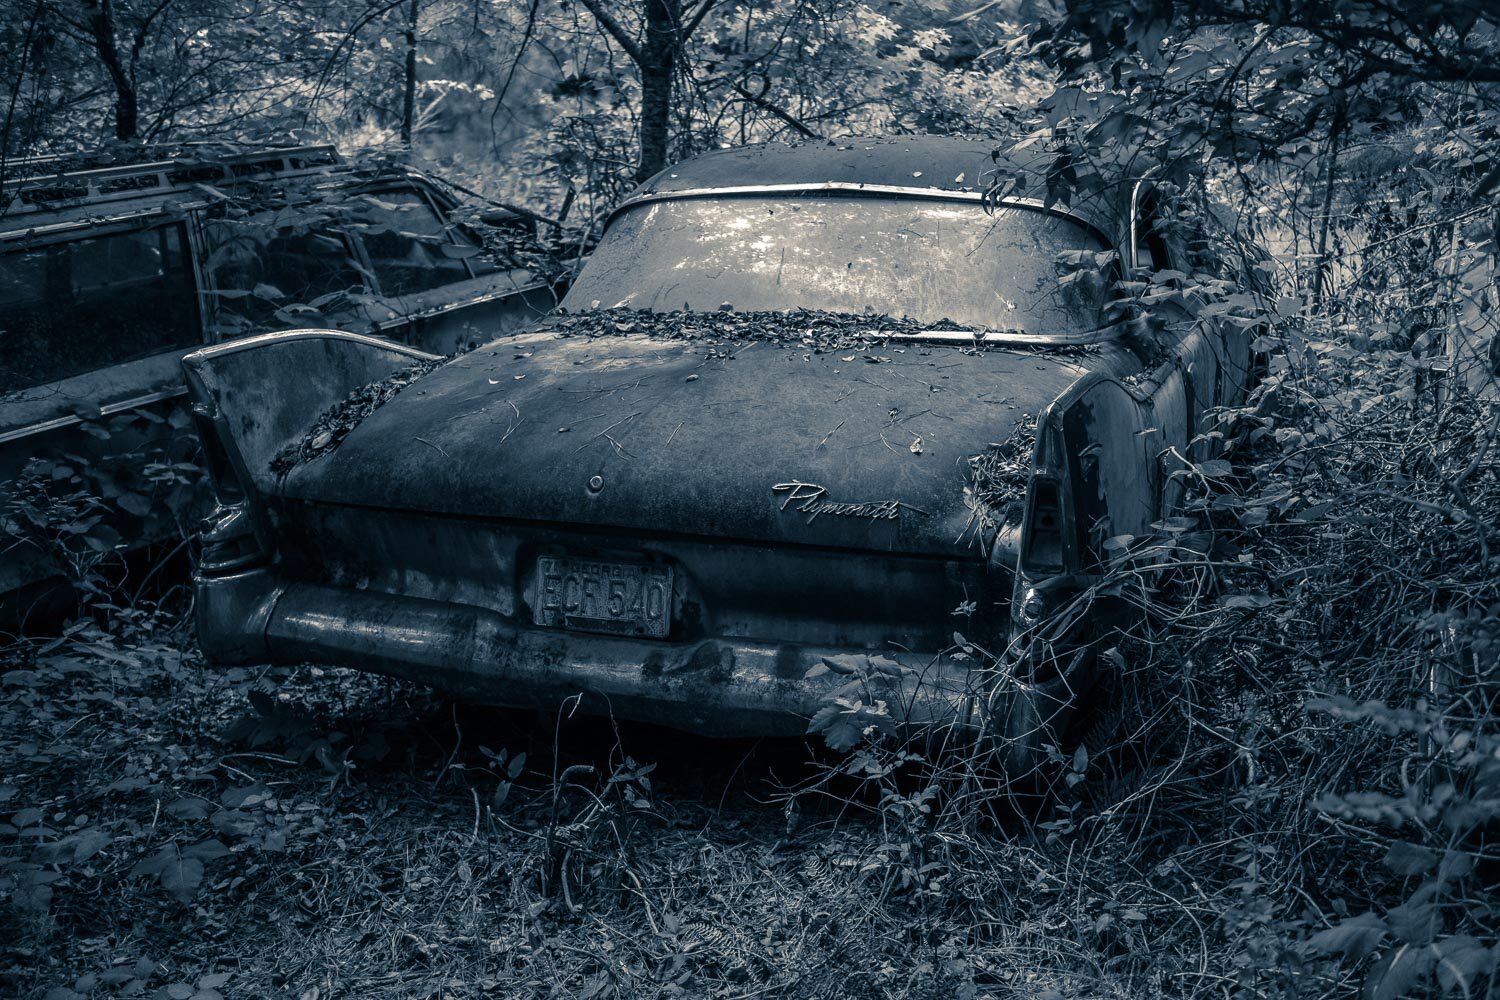 Decayed in the Shade